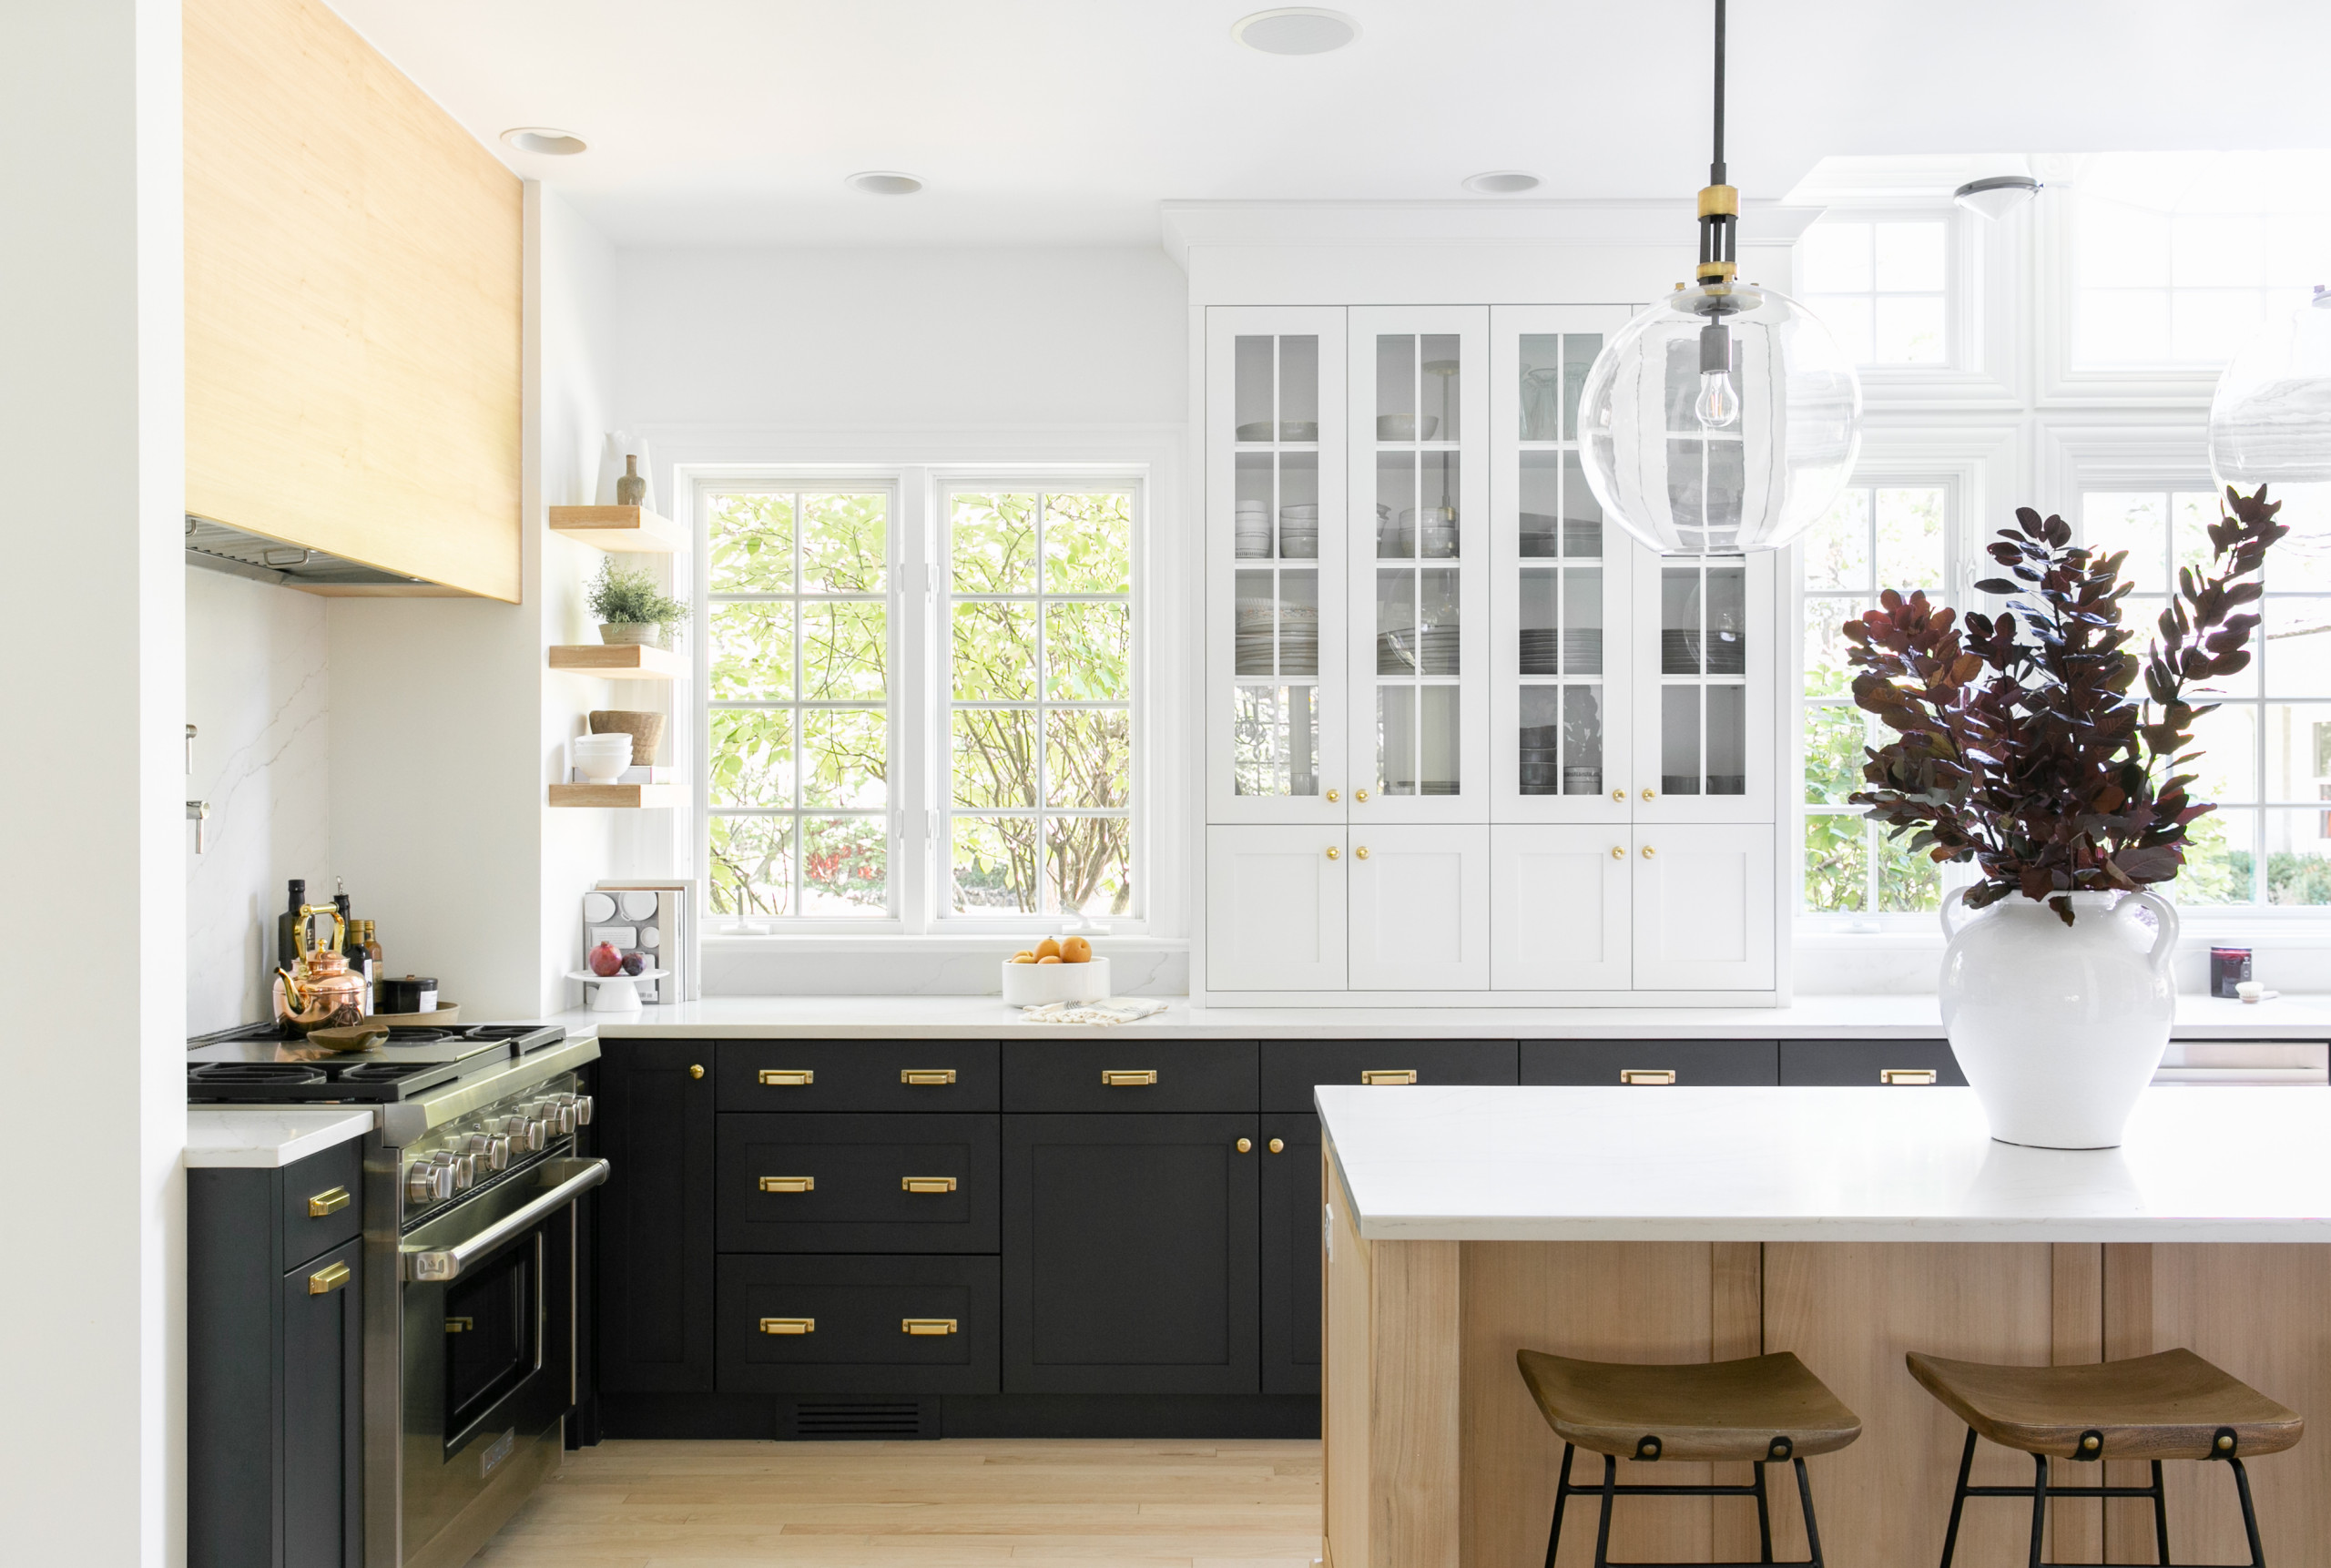 Black and White Kitchen with Black Island - Transitional - Kitchen